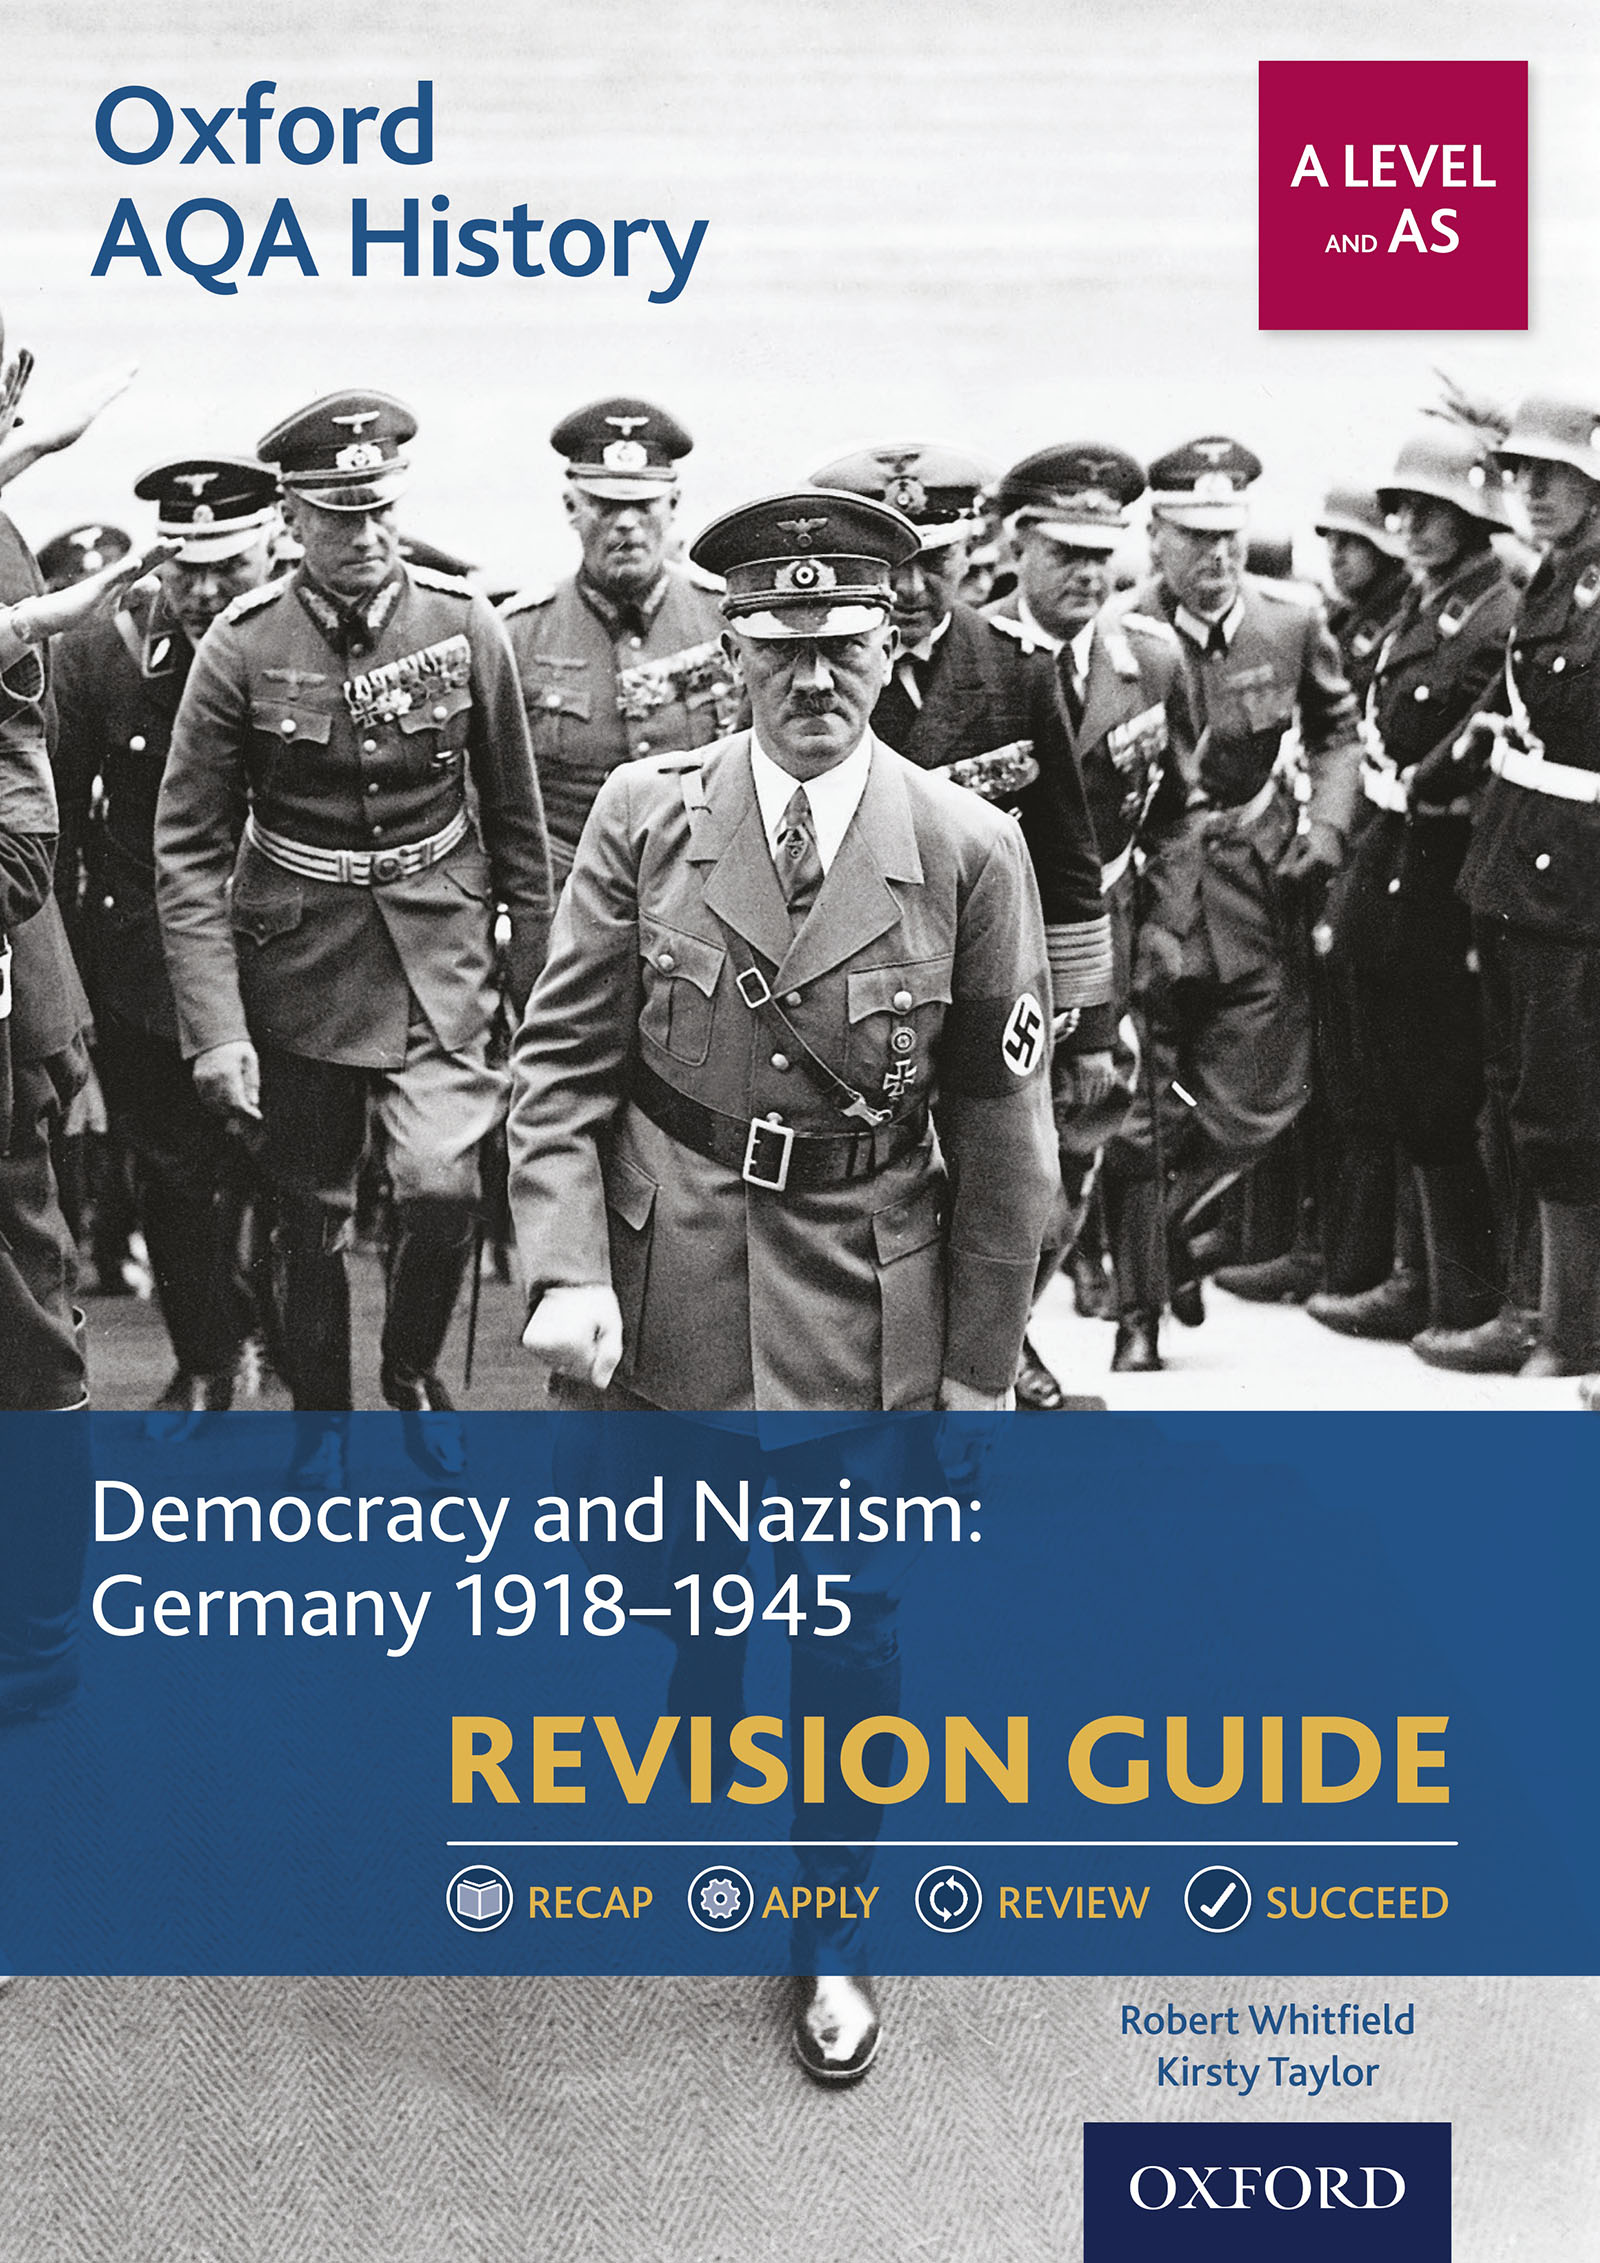 Oxford AQA History: A Level and AS: Democracy and Nazism: Germany 1918-1945 Revision Guide